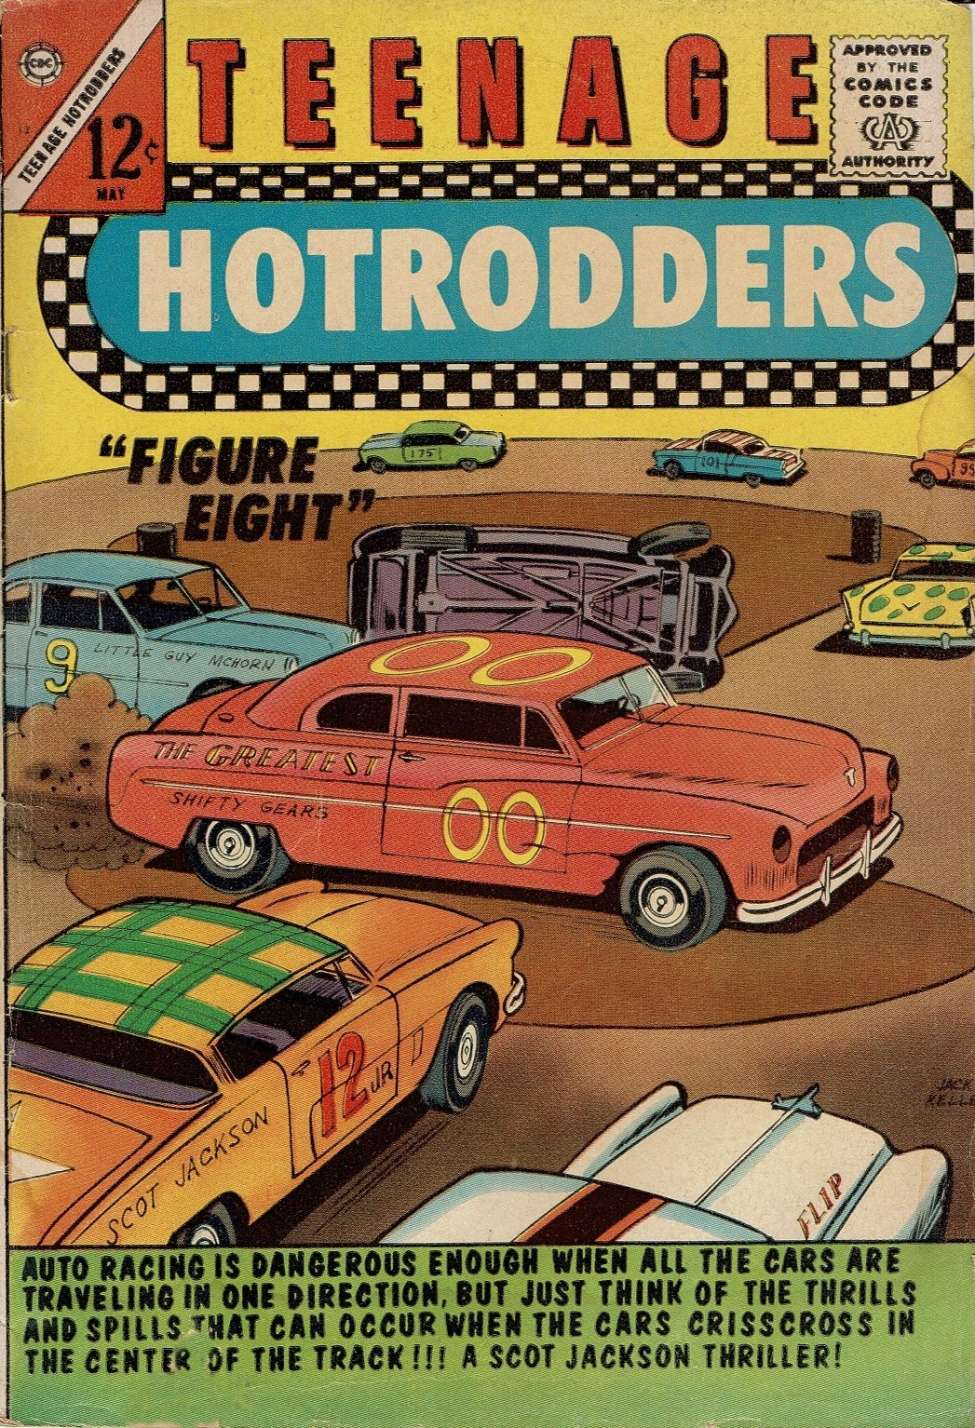 Book Cover For Teenage Hotrodders 12